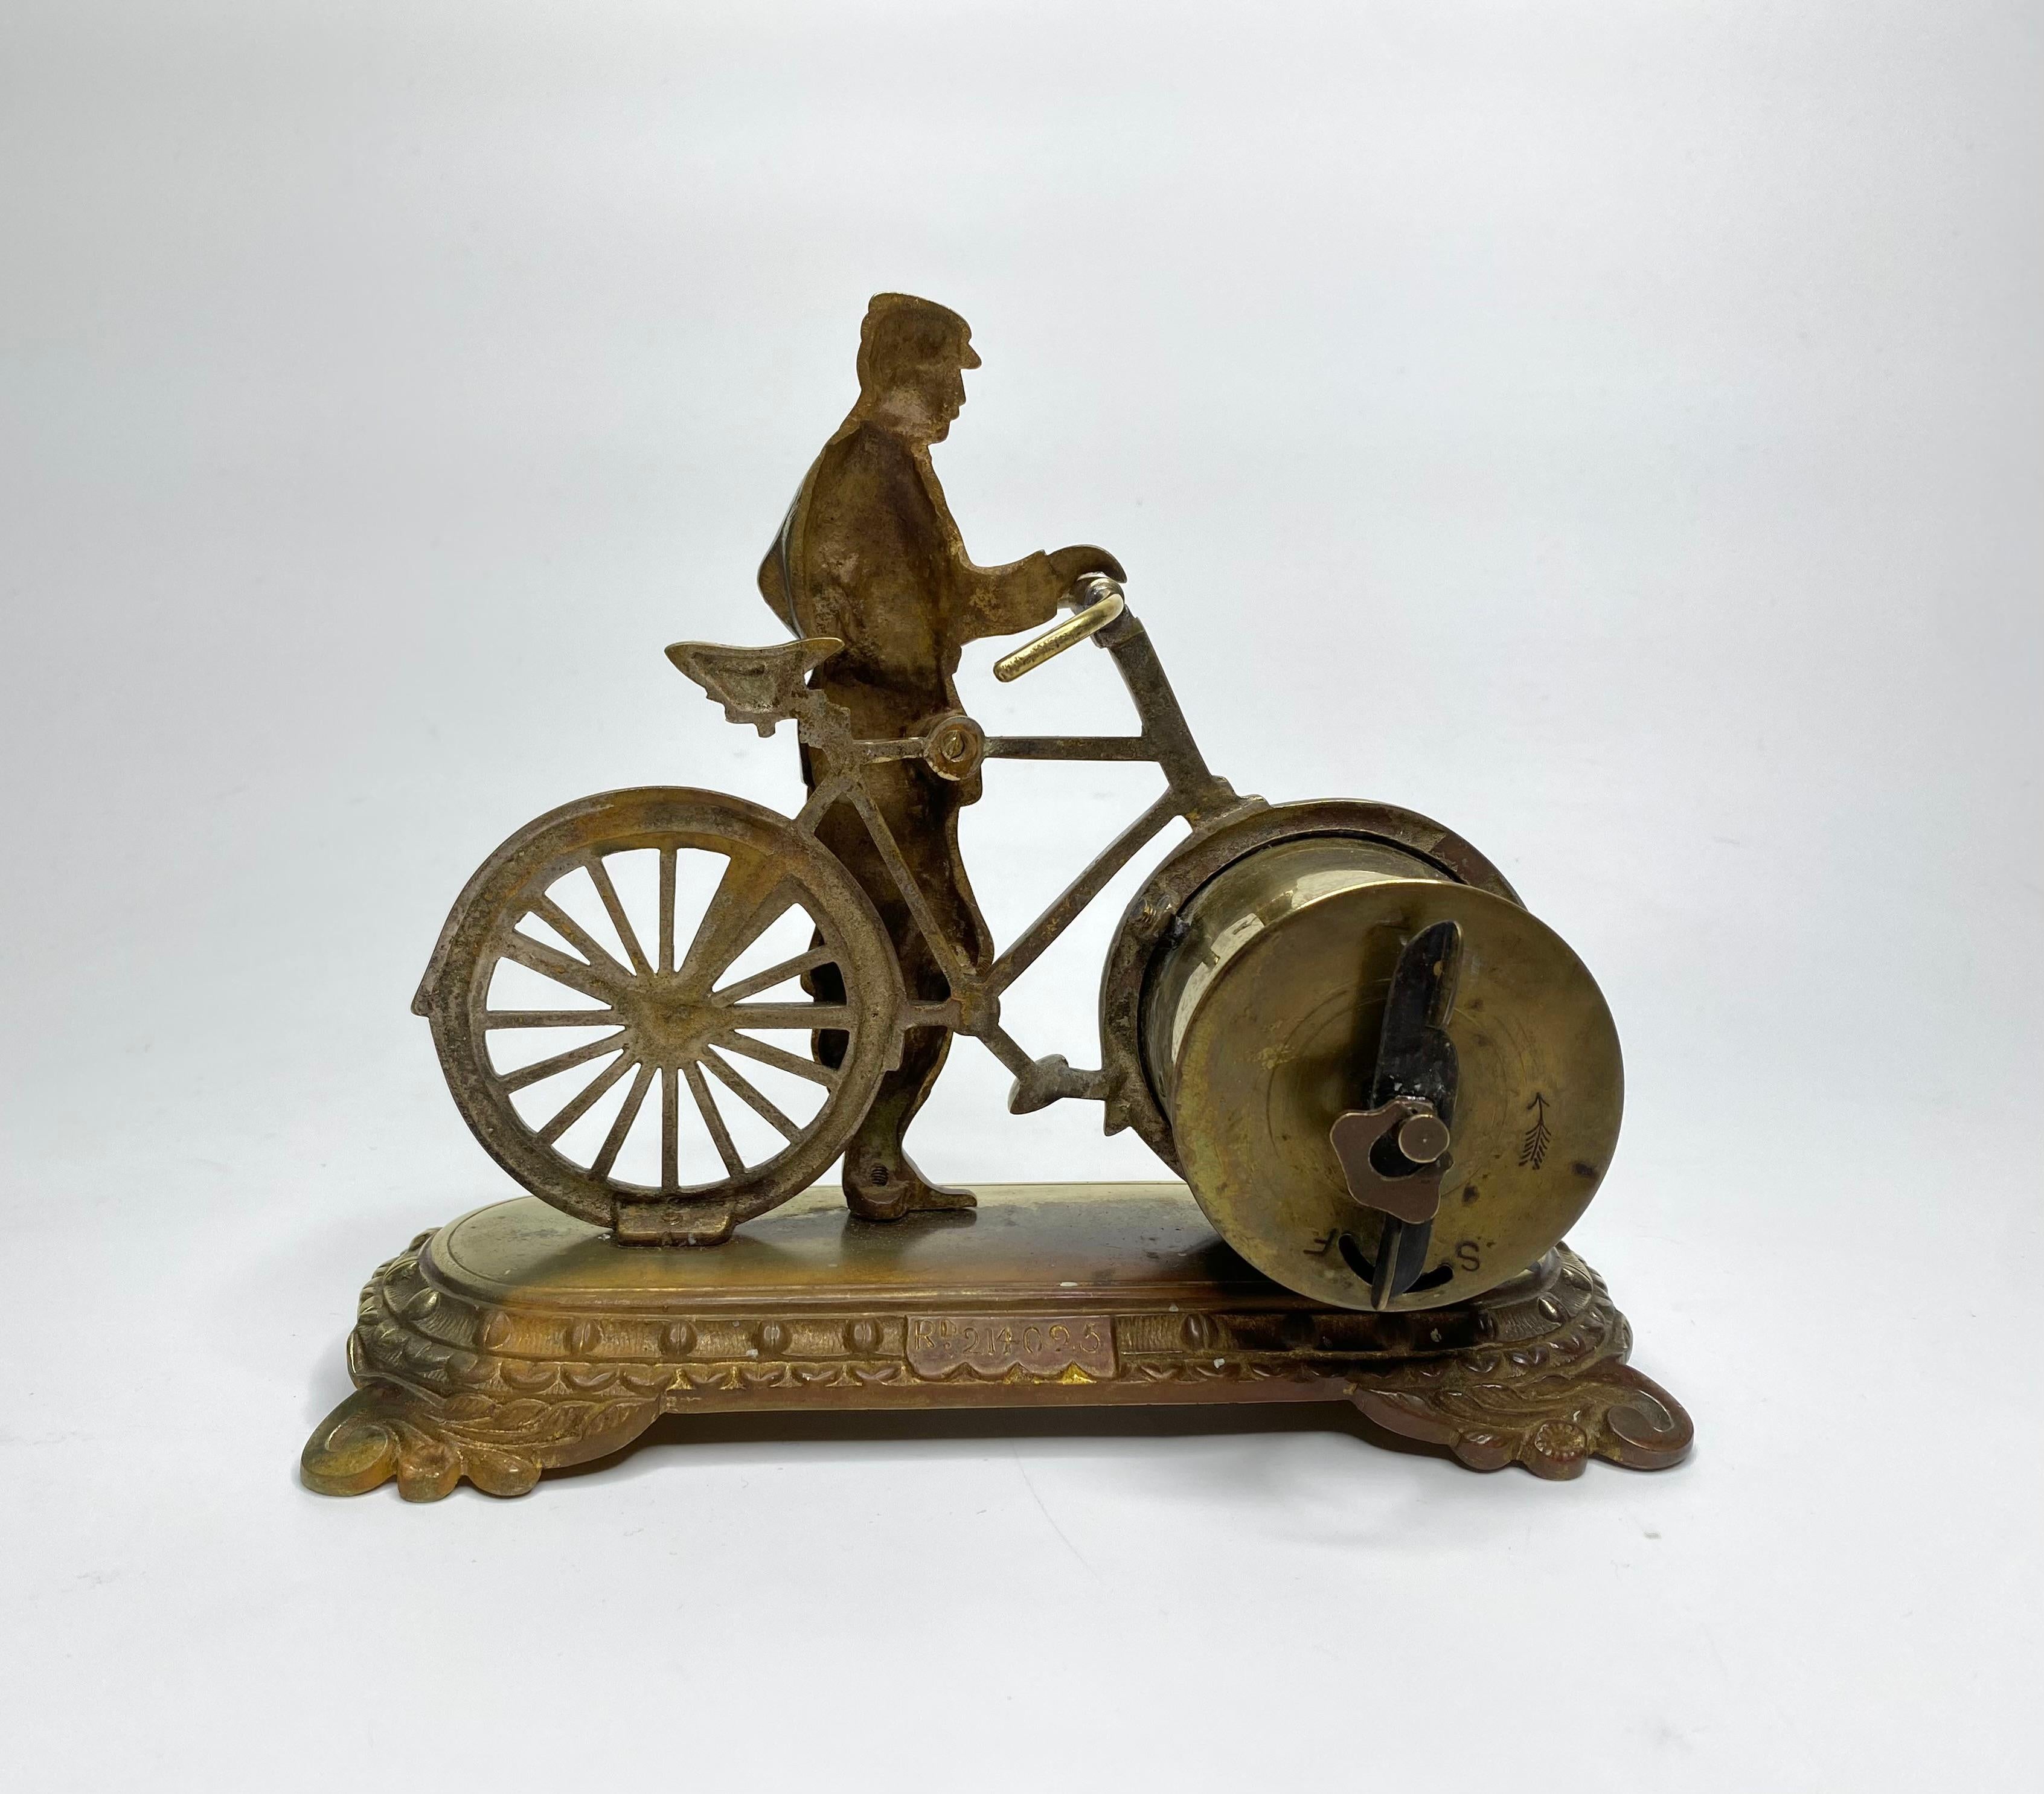 Edwardian Brass cyclist and bicycle clock, England, c. 1910.